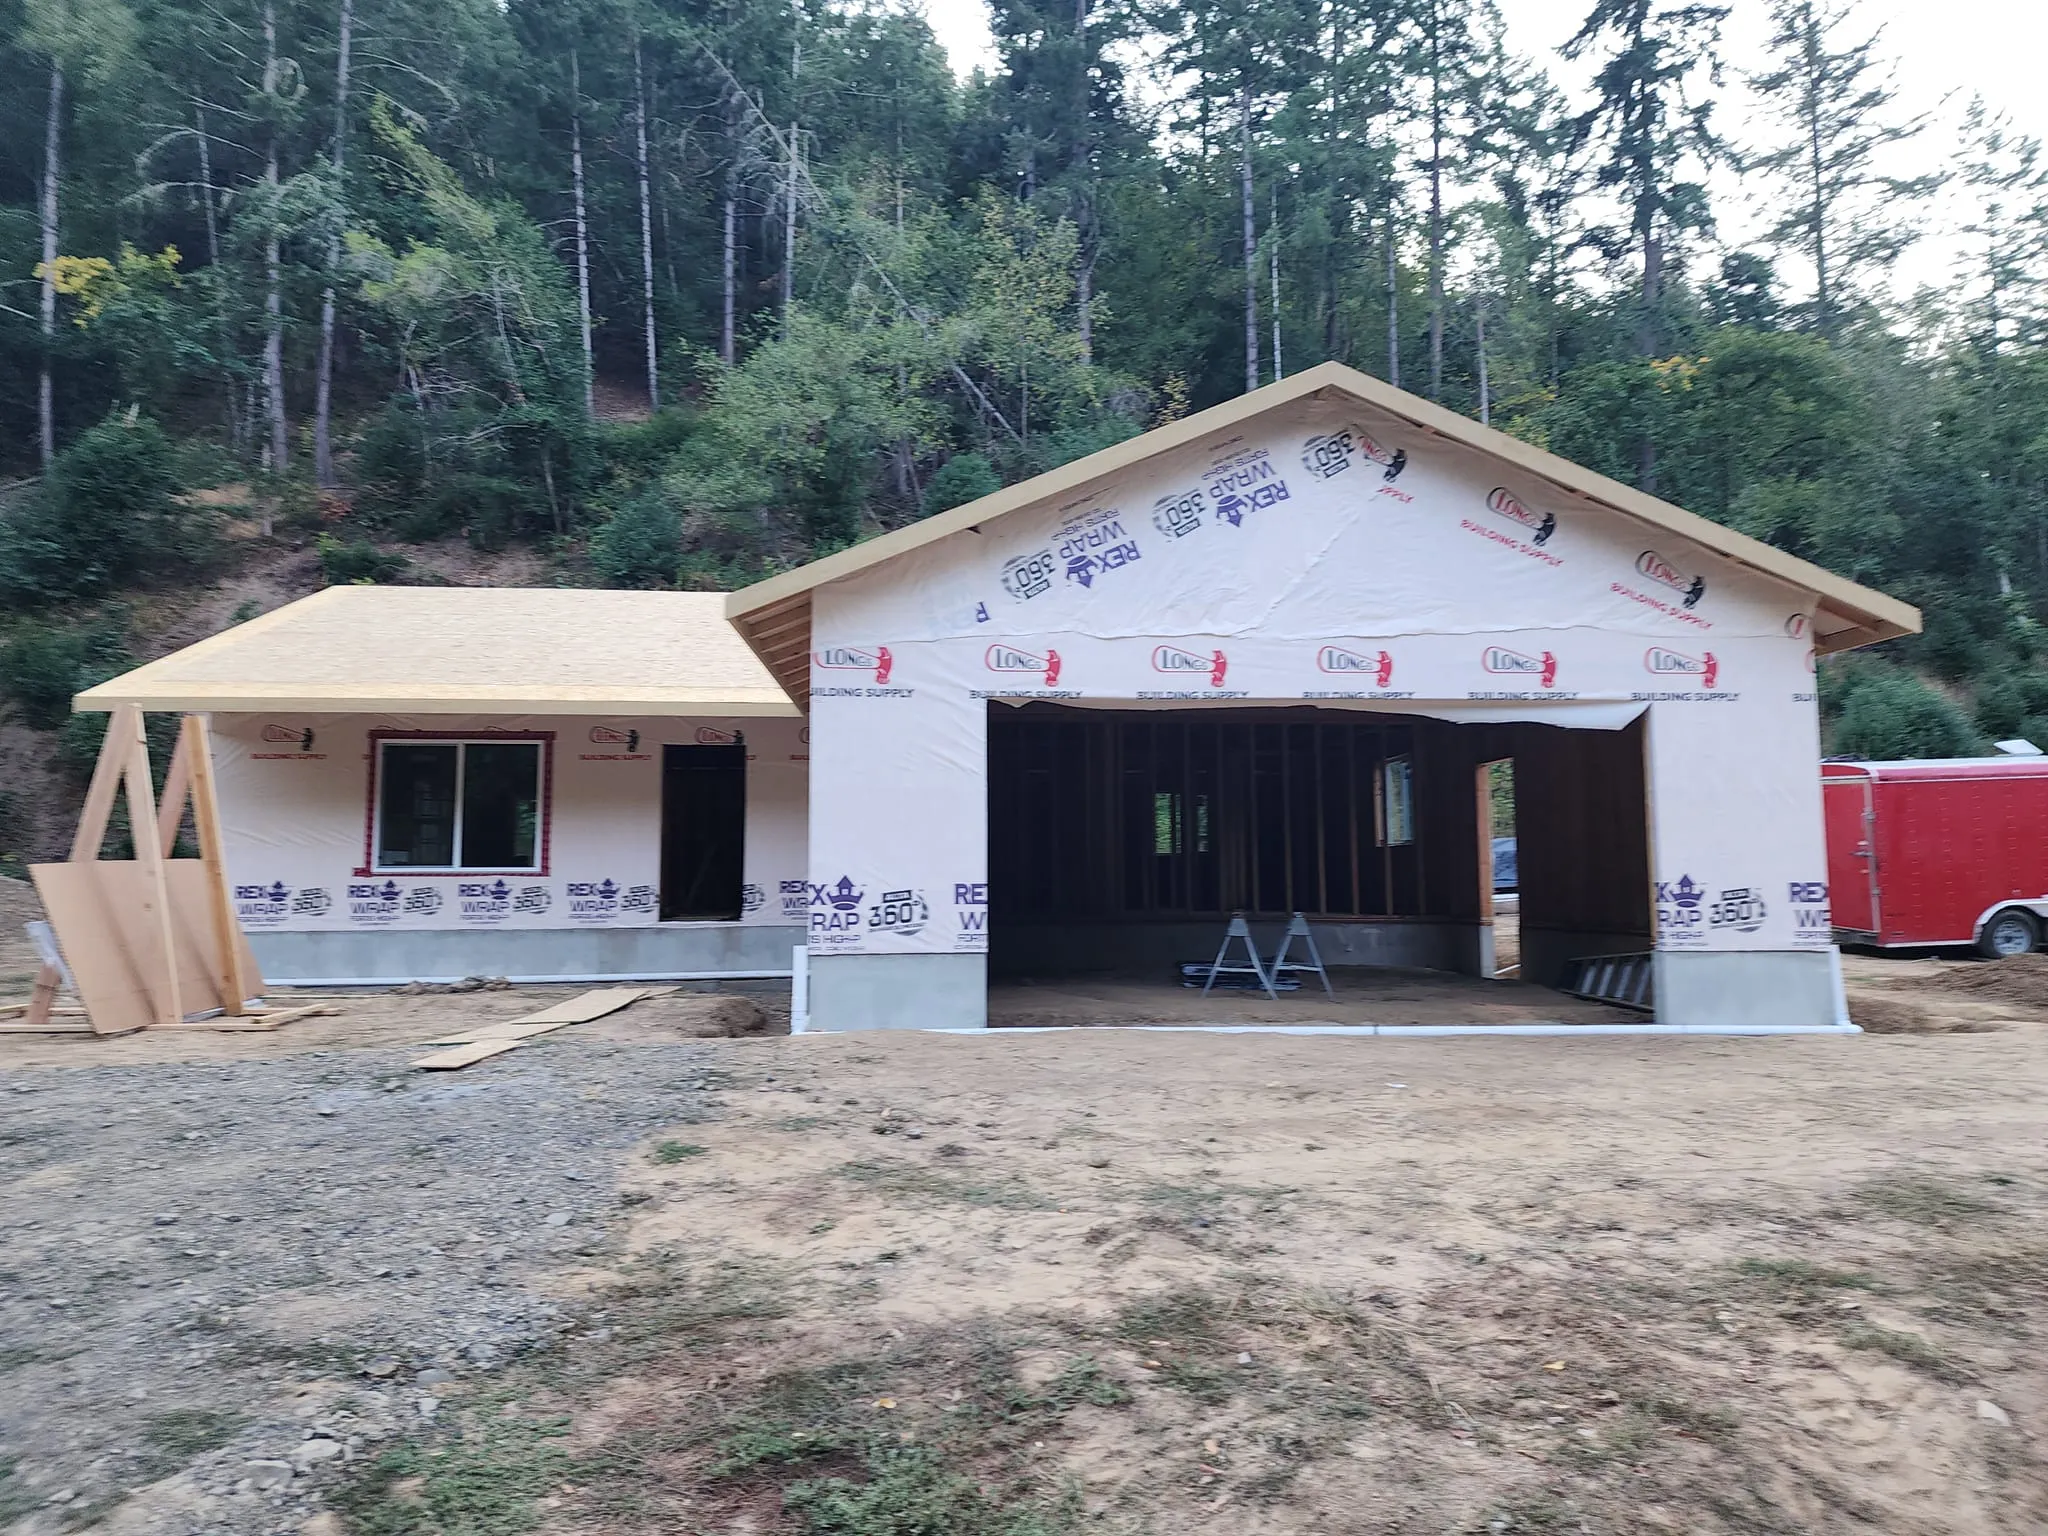 New Construction for S&R Family Construction LLC in Winston, OR